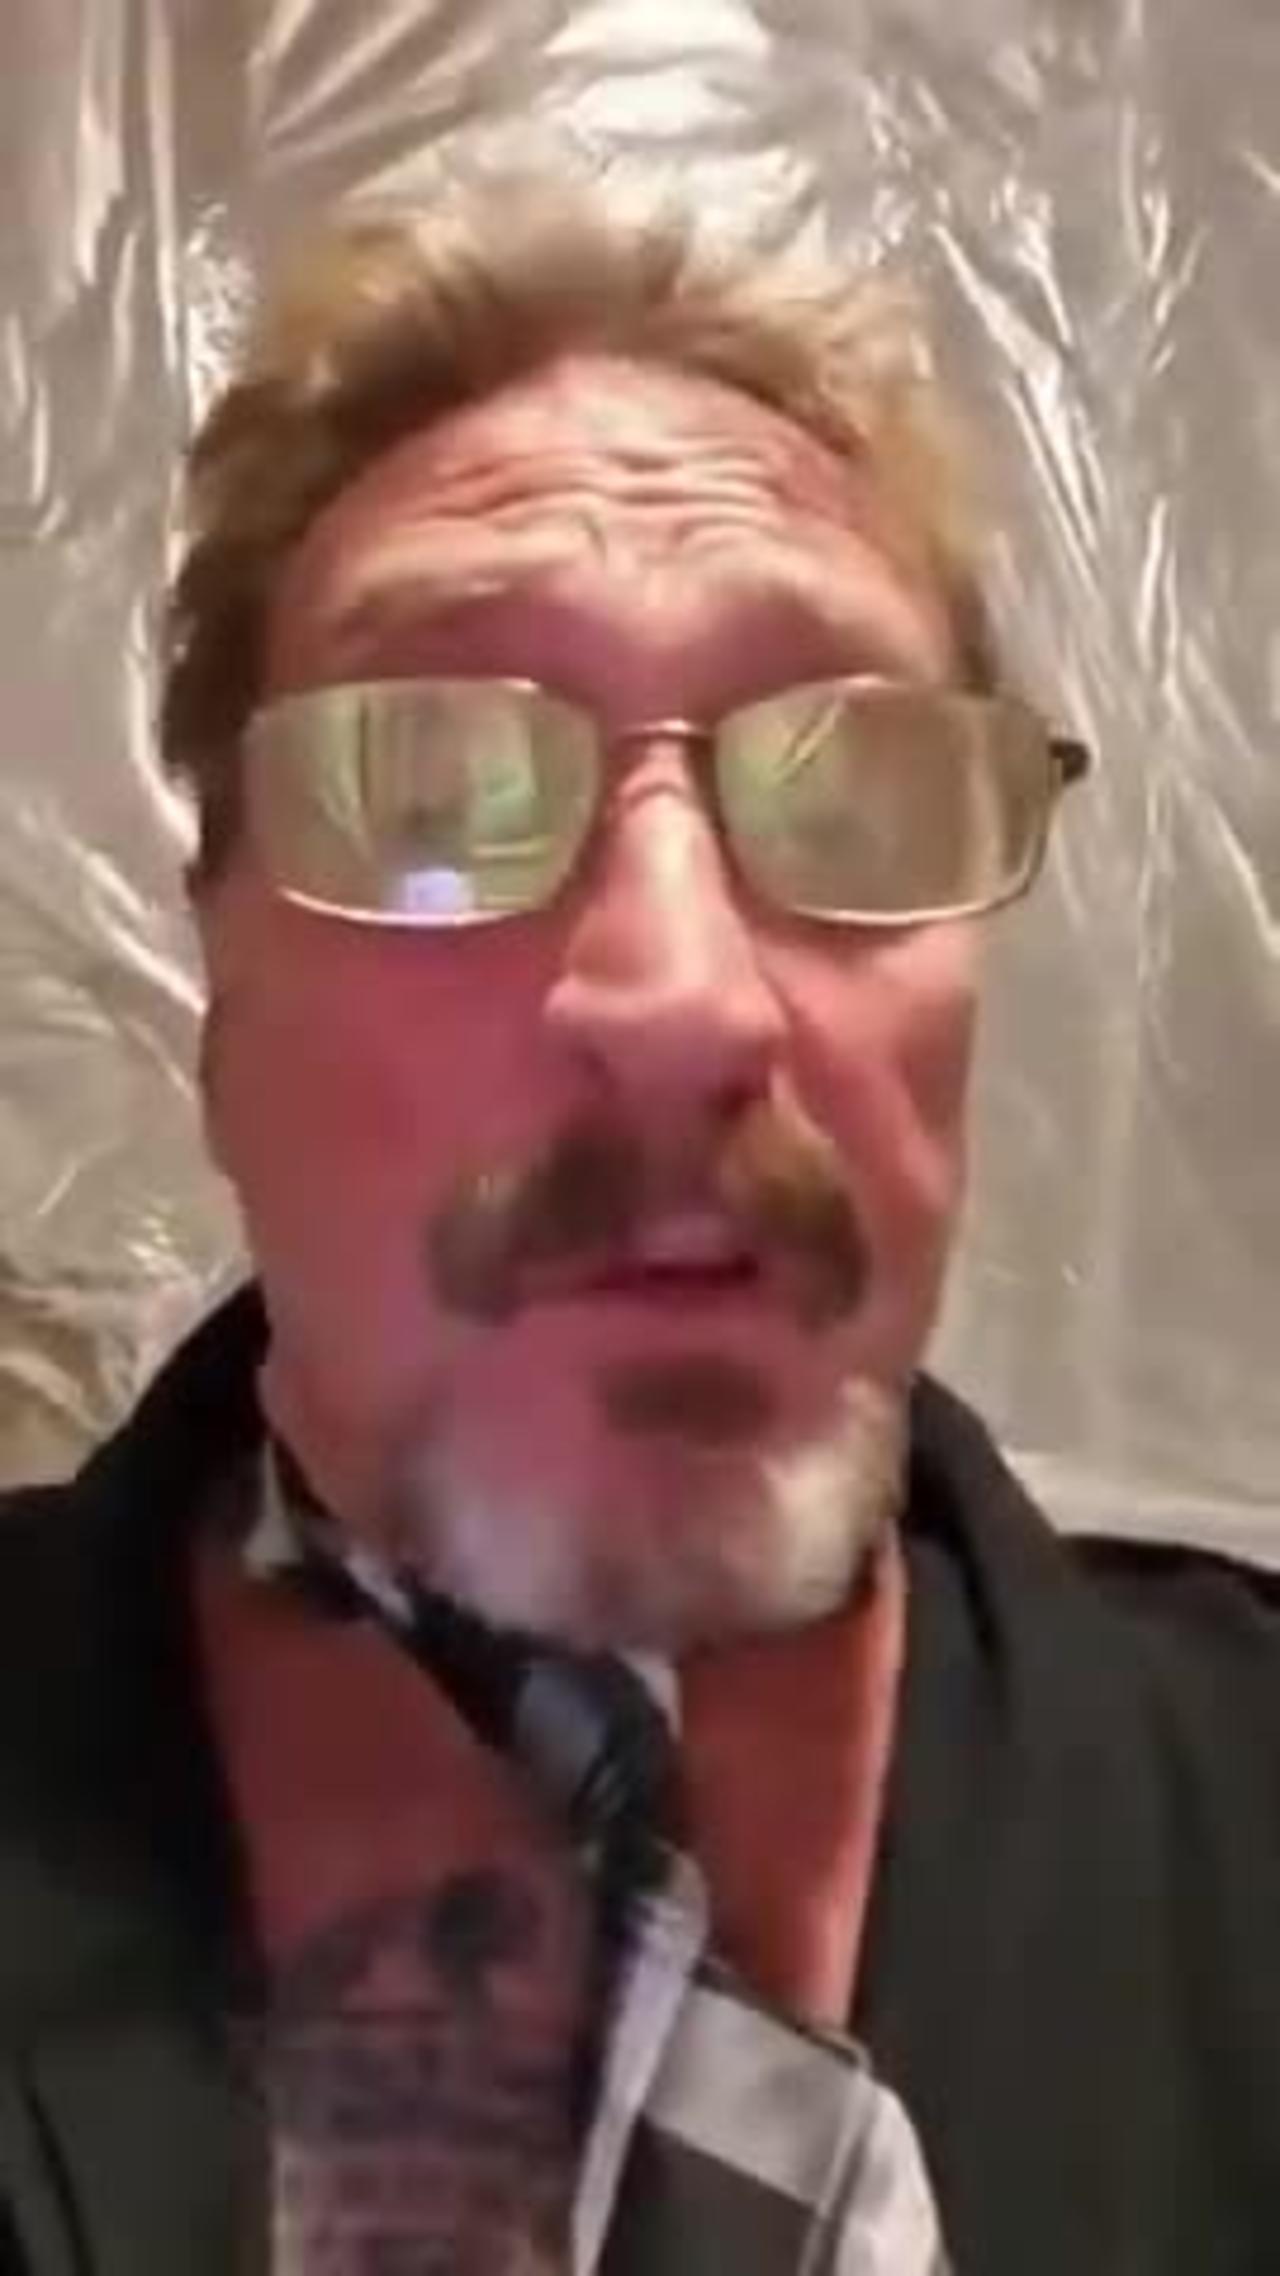 John McAfee: “I am an escaped slave - All the Worlds slave masters are looking for me...”